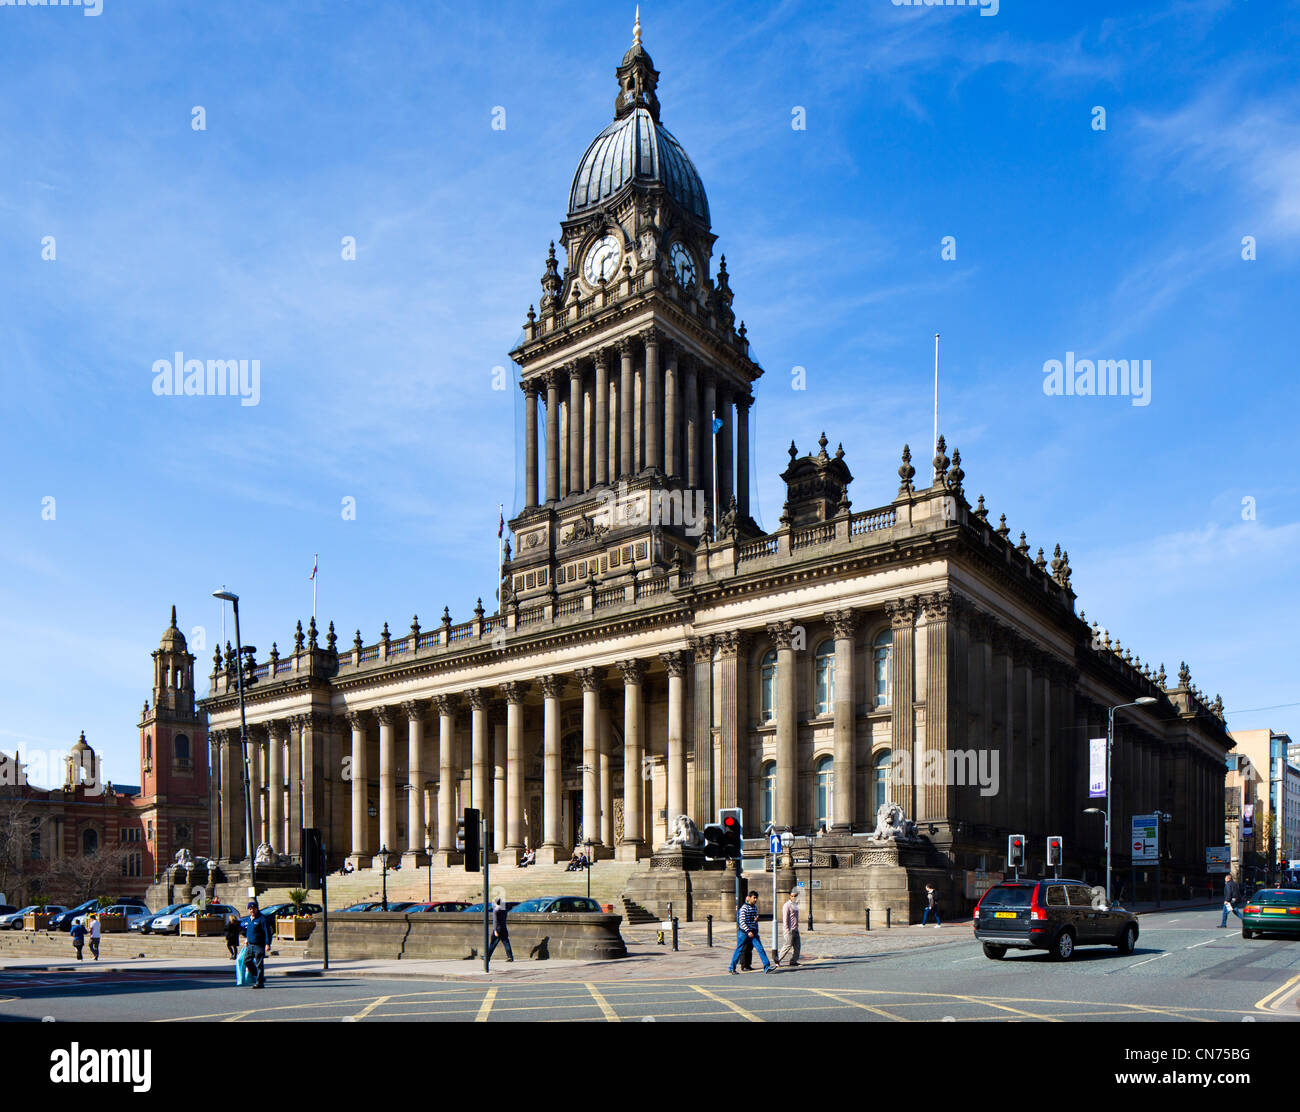 Leeds Town Hall progettata dall'architetto locale Cuthbert Broderick, Leeds, West Yorkshire, Inghilterra Foto Stock